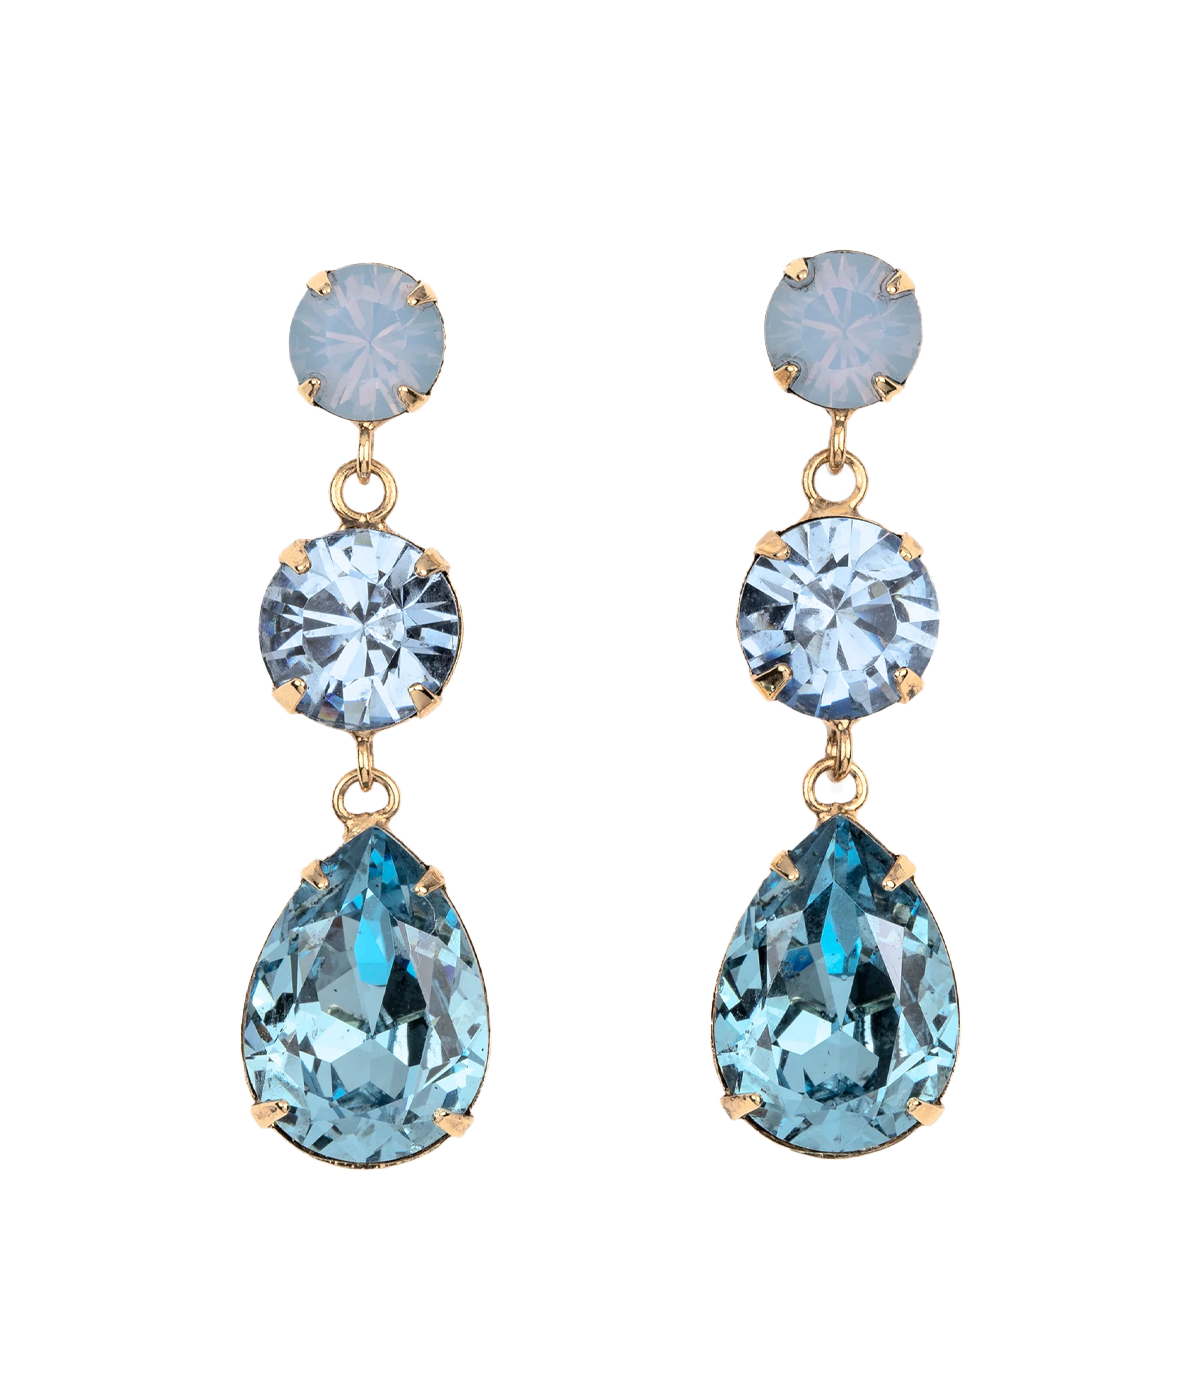 Image of  drop earrings featuring a teardrop crystal alongside round crystals in varying sizes in varying blue shades with gold hardware.